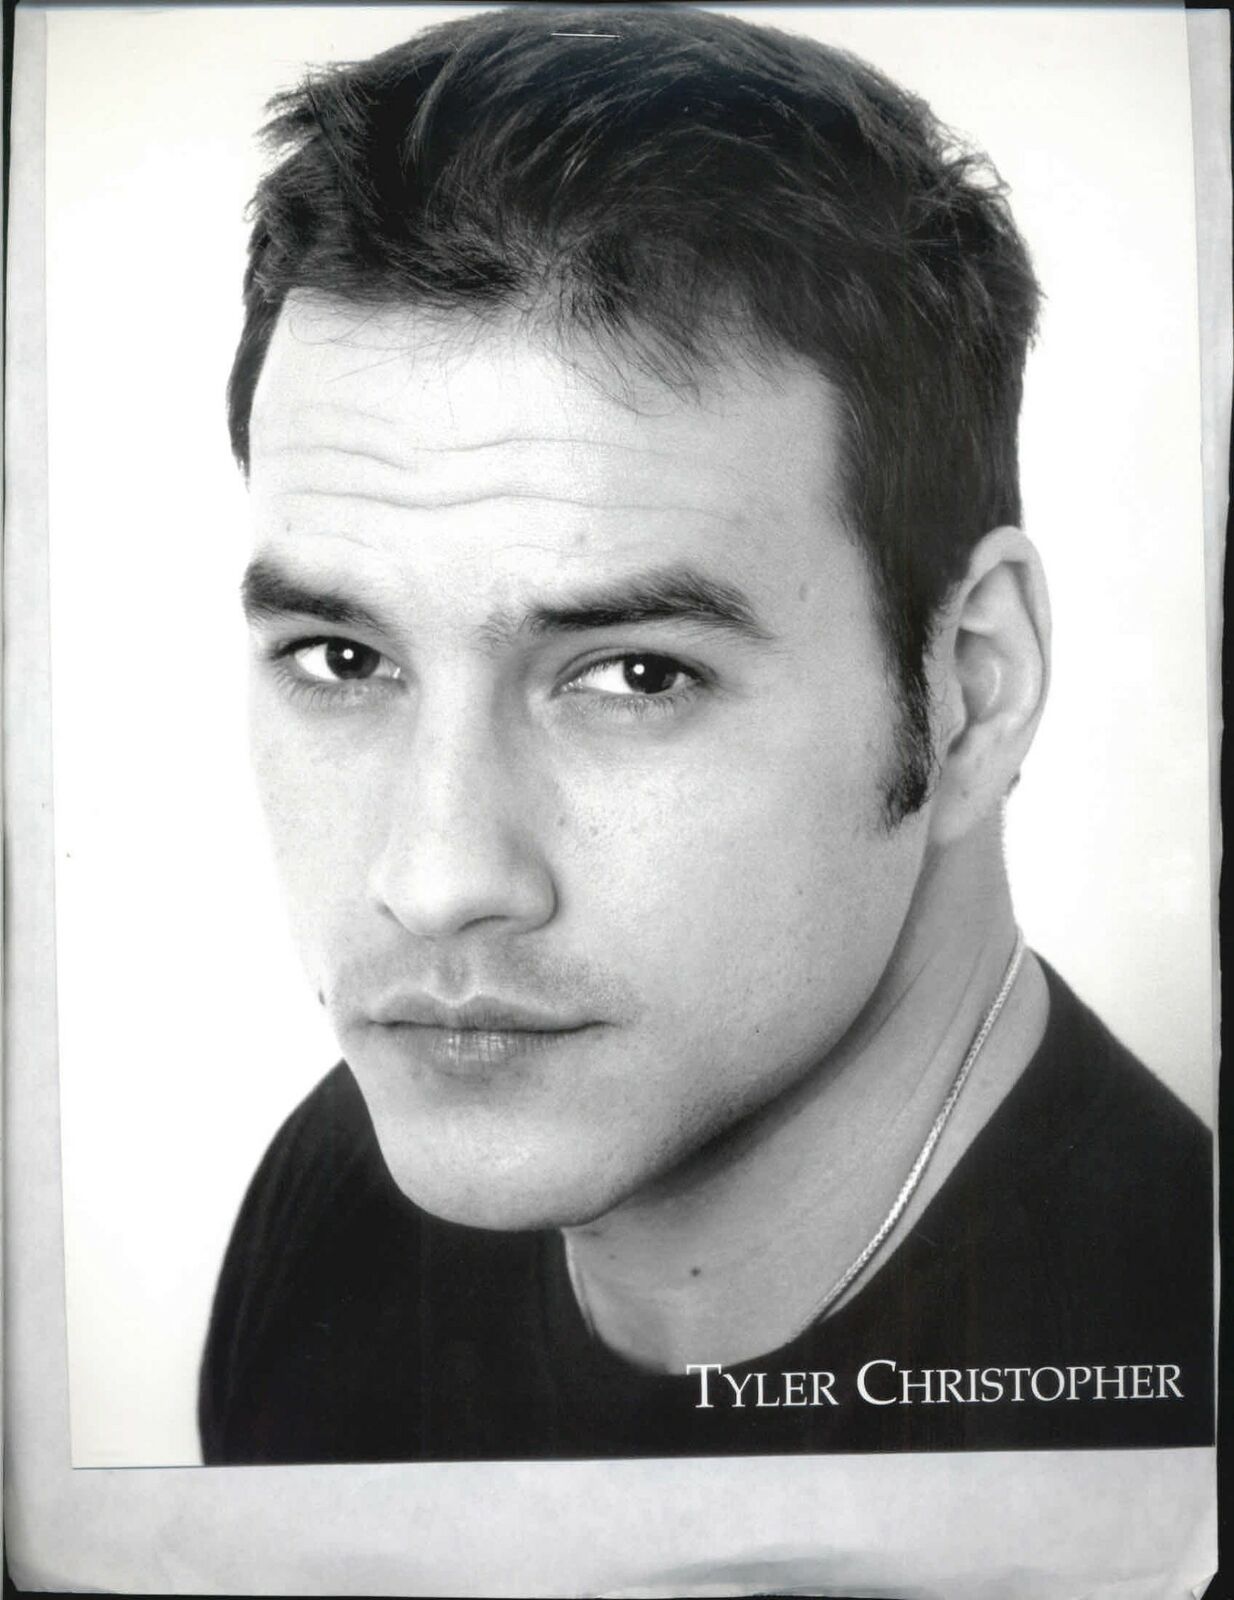 Tyler Christopher - 8x10 Headshot Photo Poster painting with Resume - General Hospital